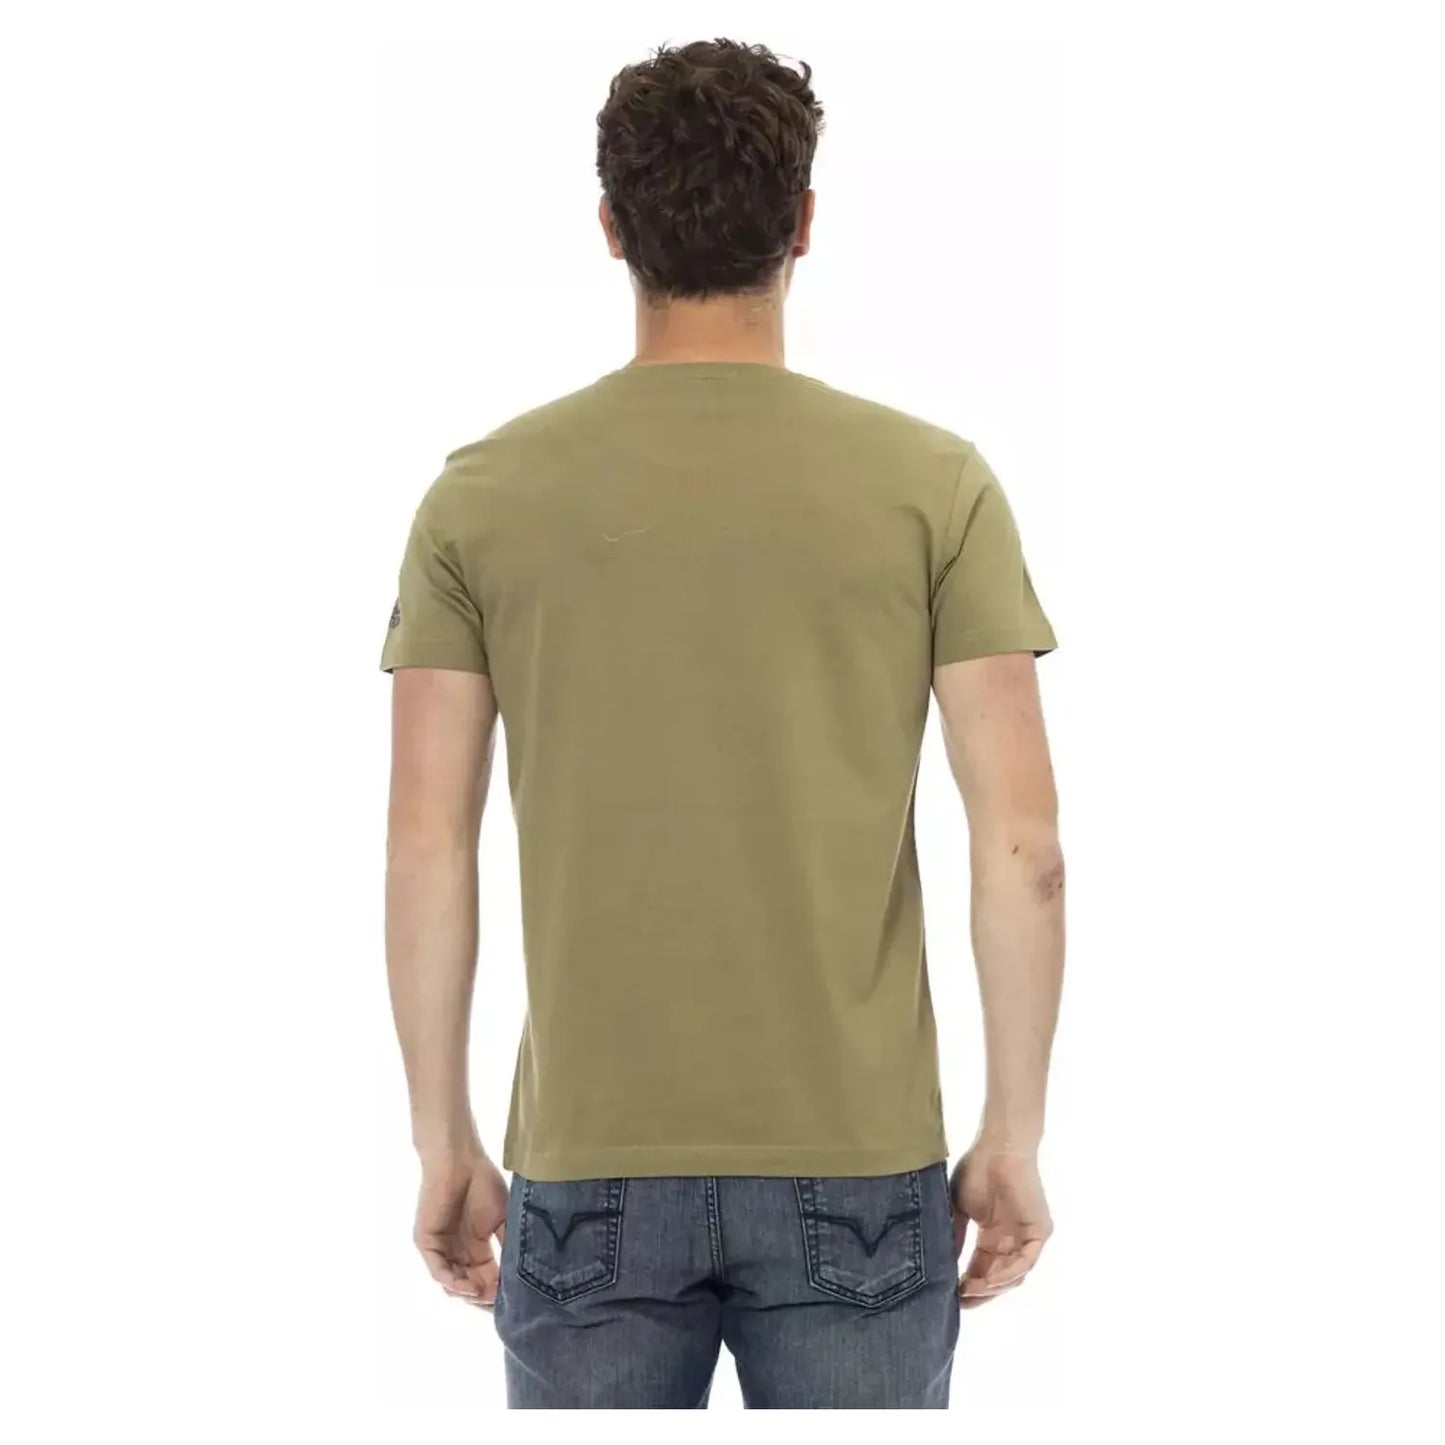 Trussardi Action Elegant Green Tee with Artistic Front Print green-cotton-t-shirt-46